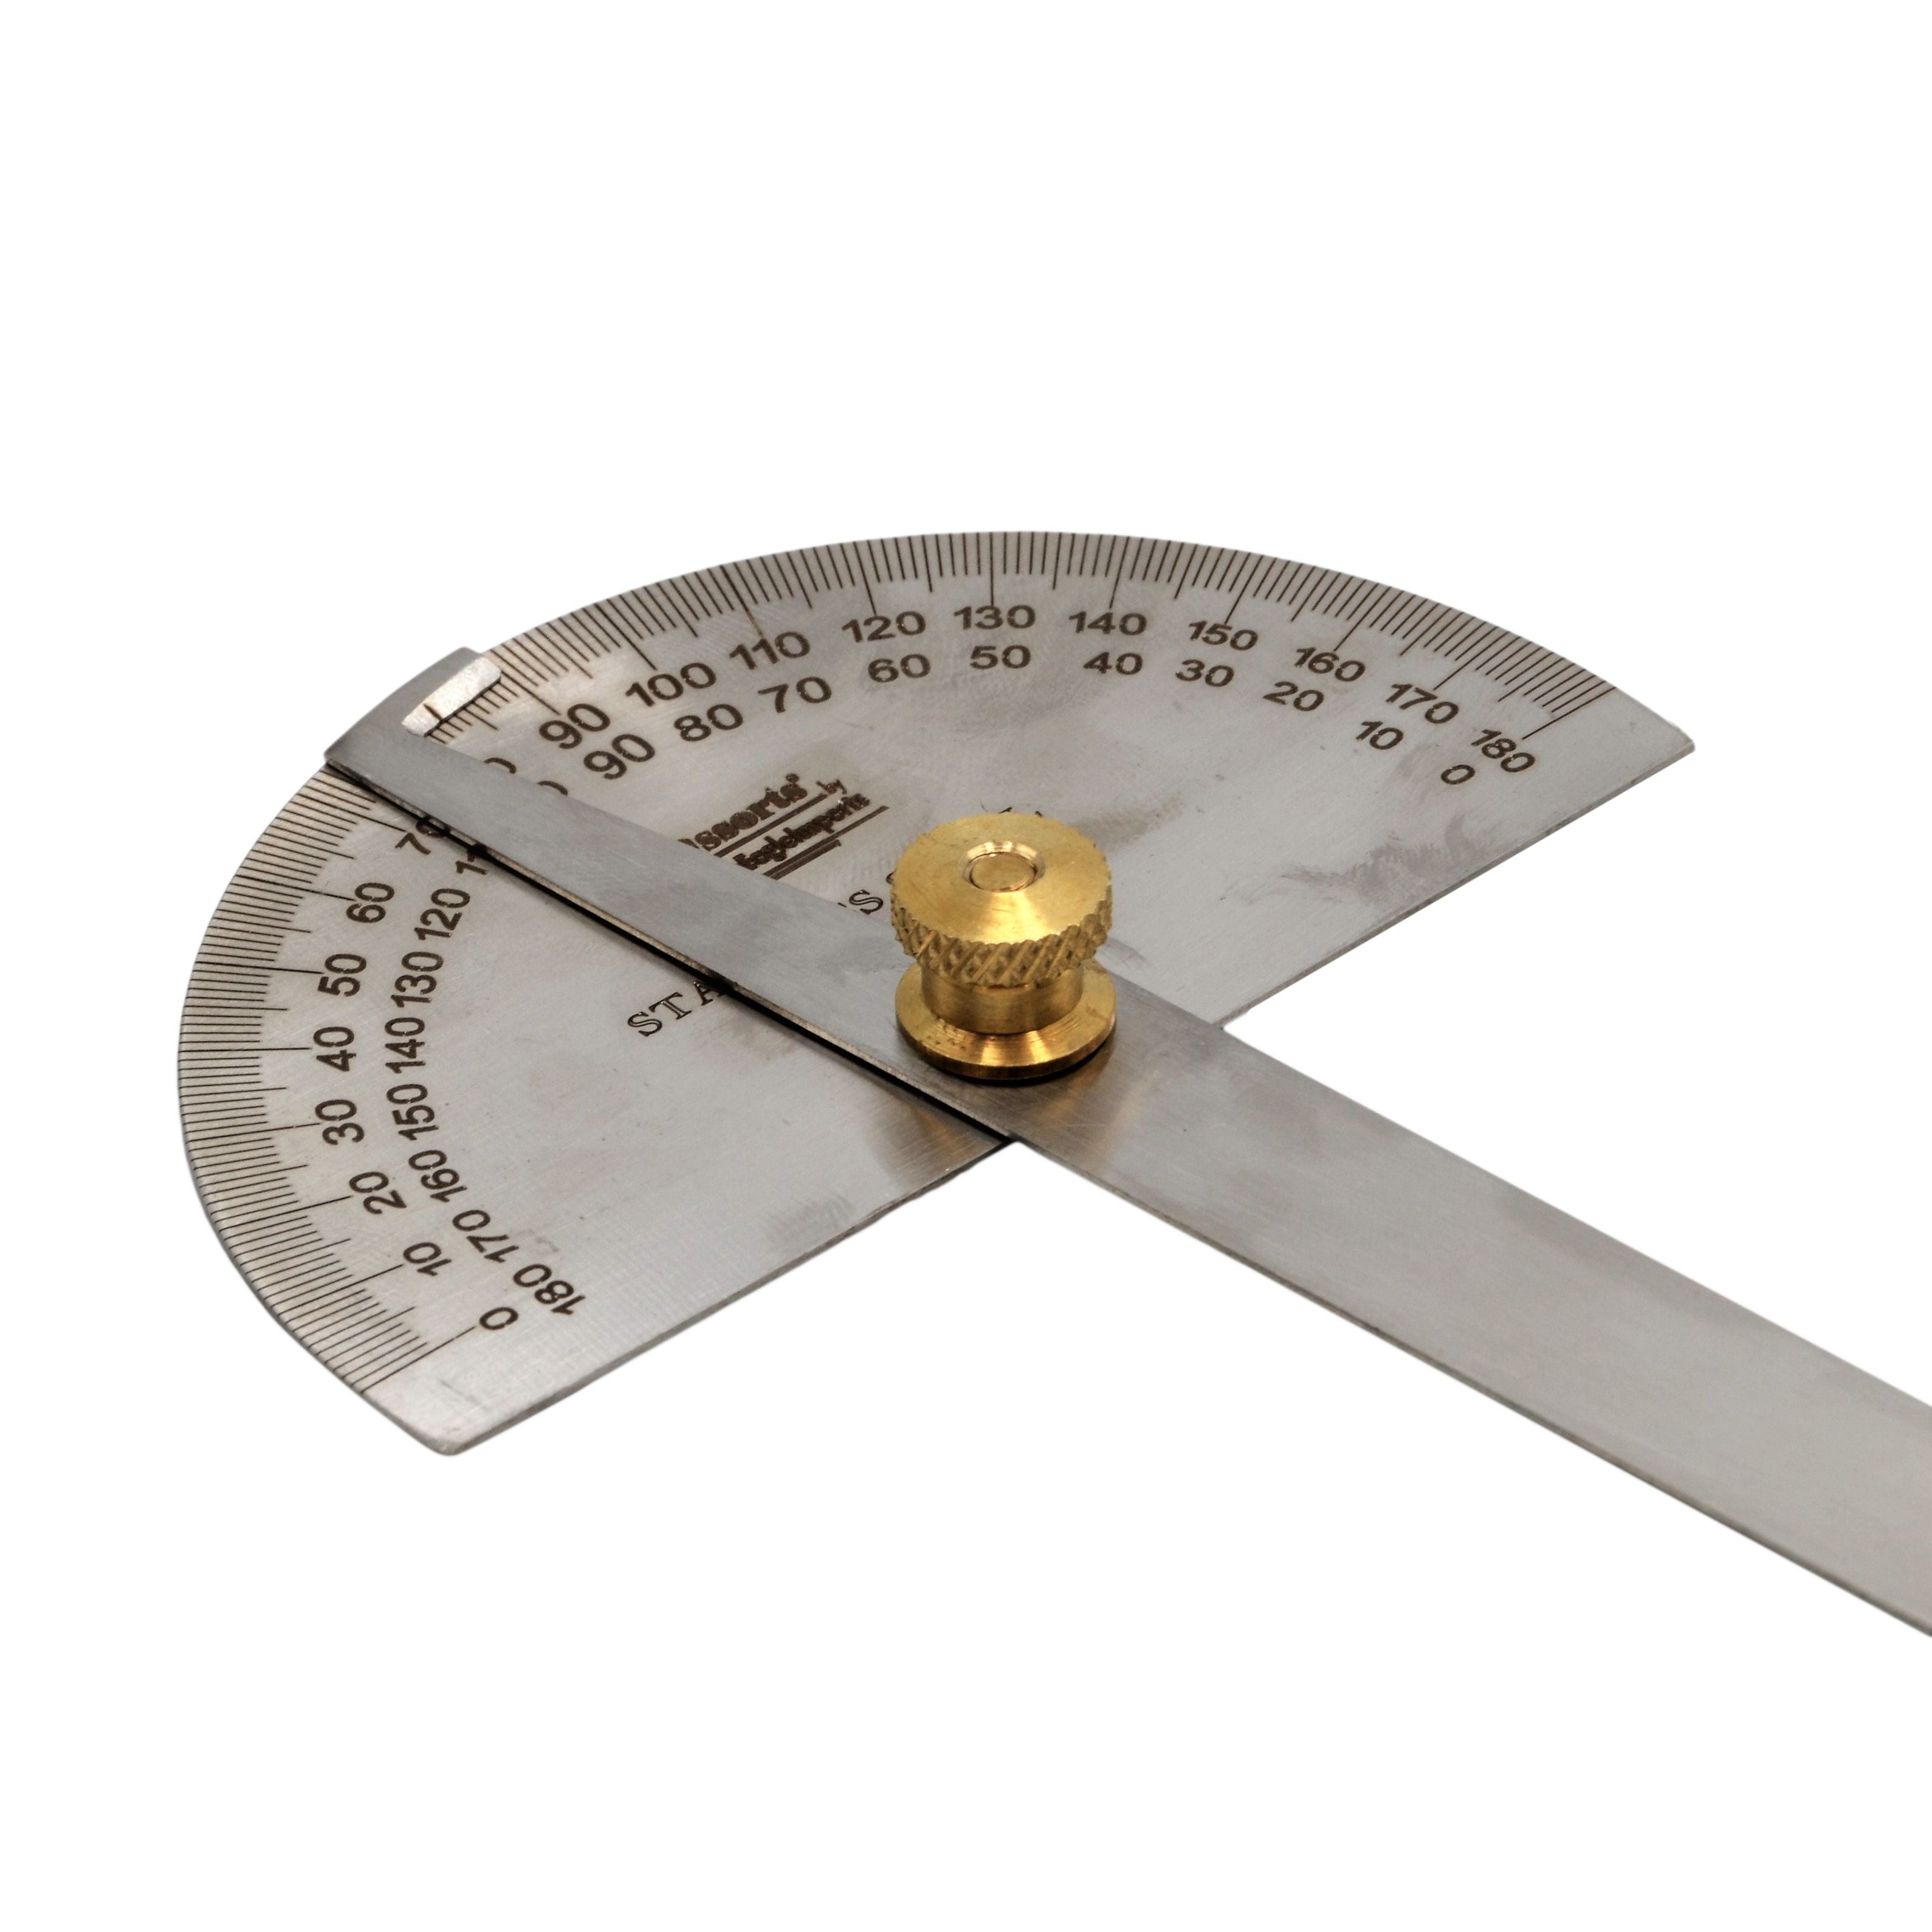 Stainless Steel 0-180 Degree Protractor Ruler Angle Gauge